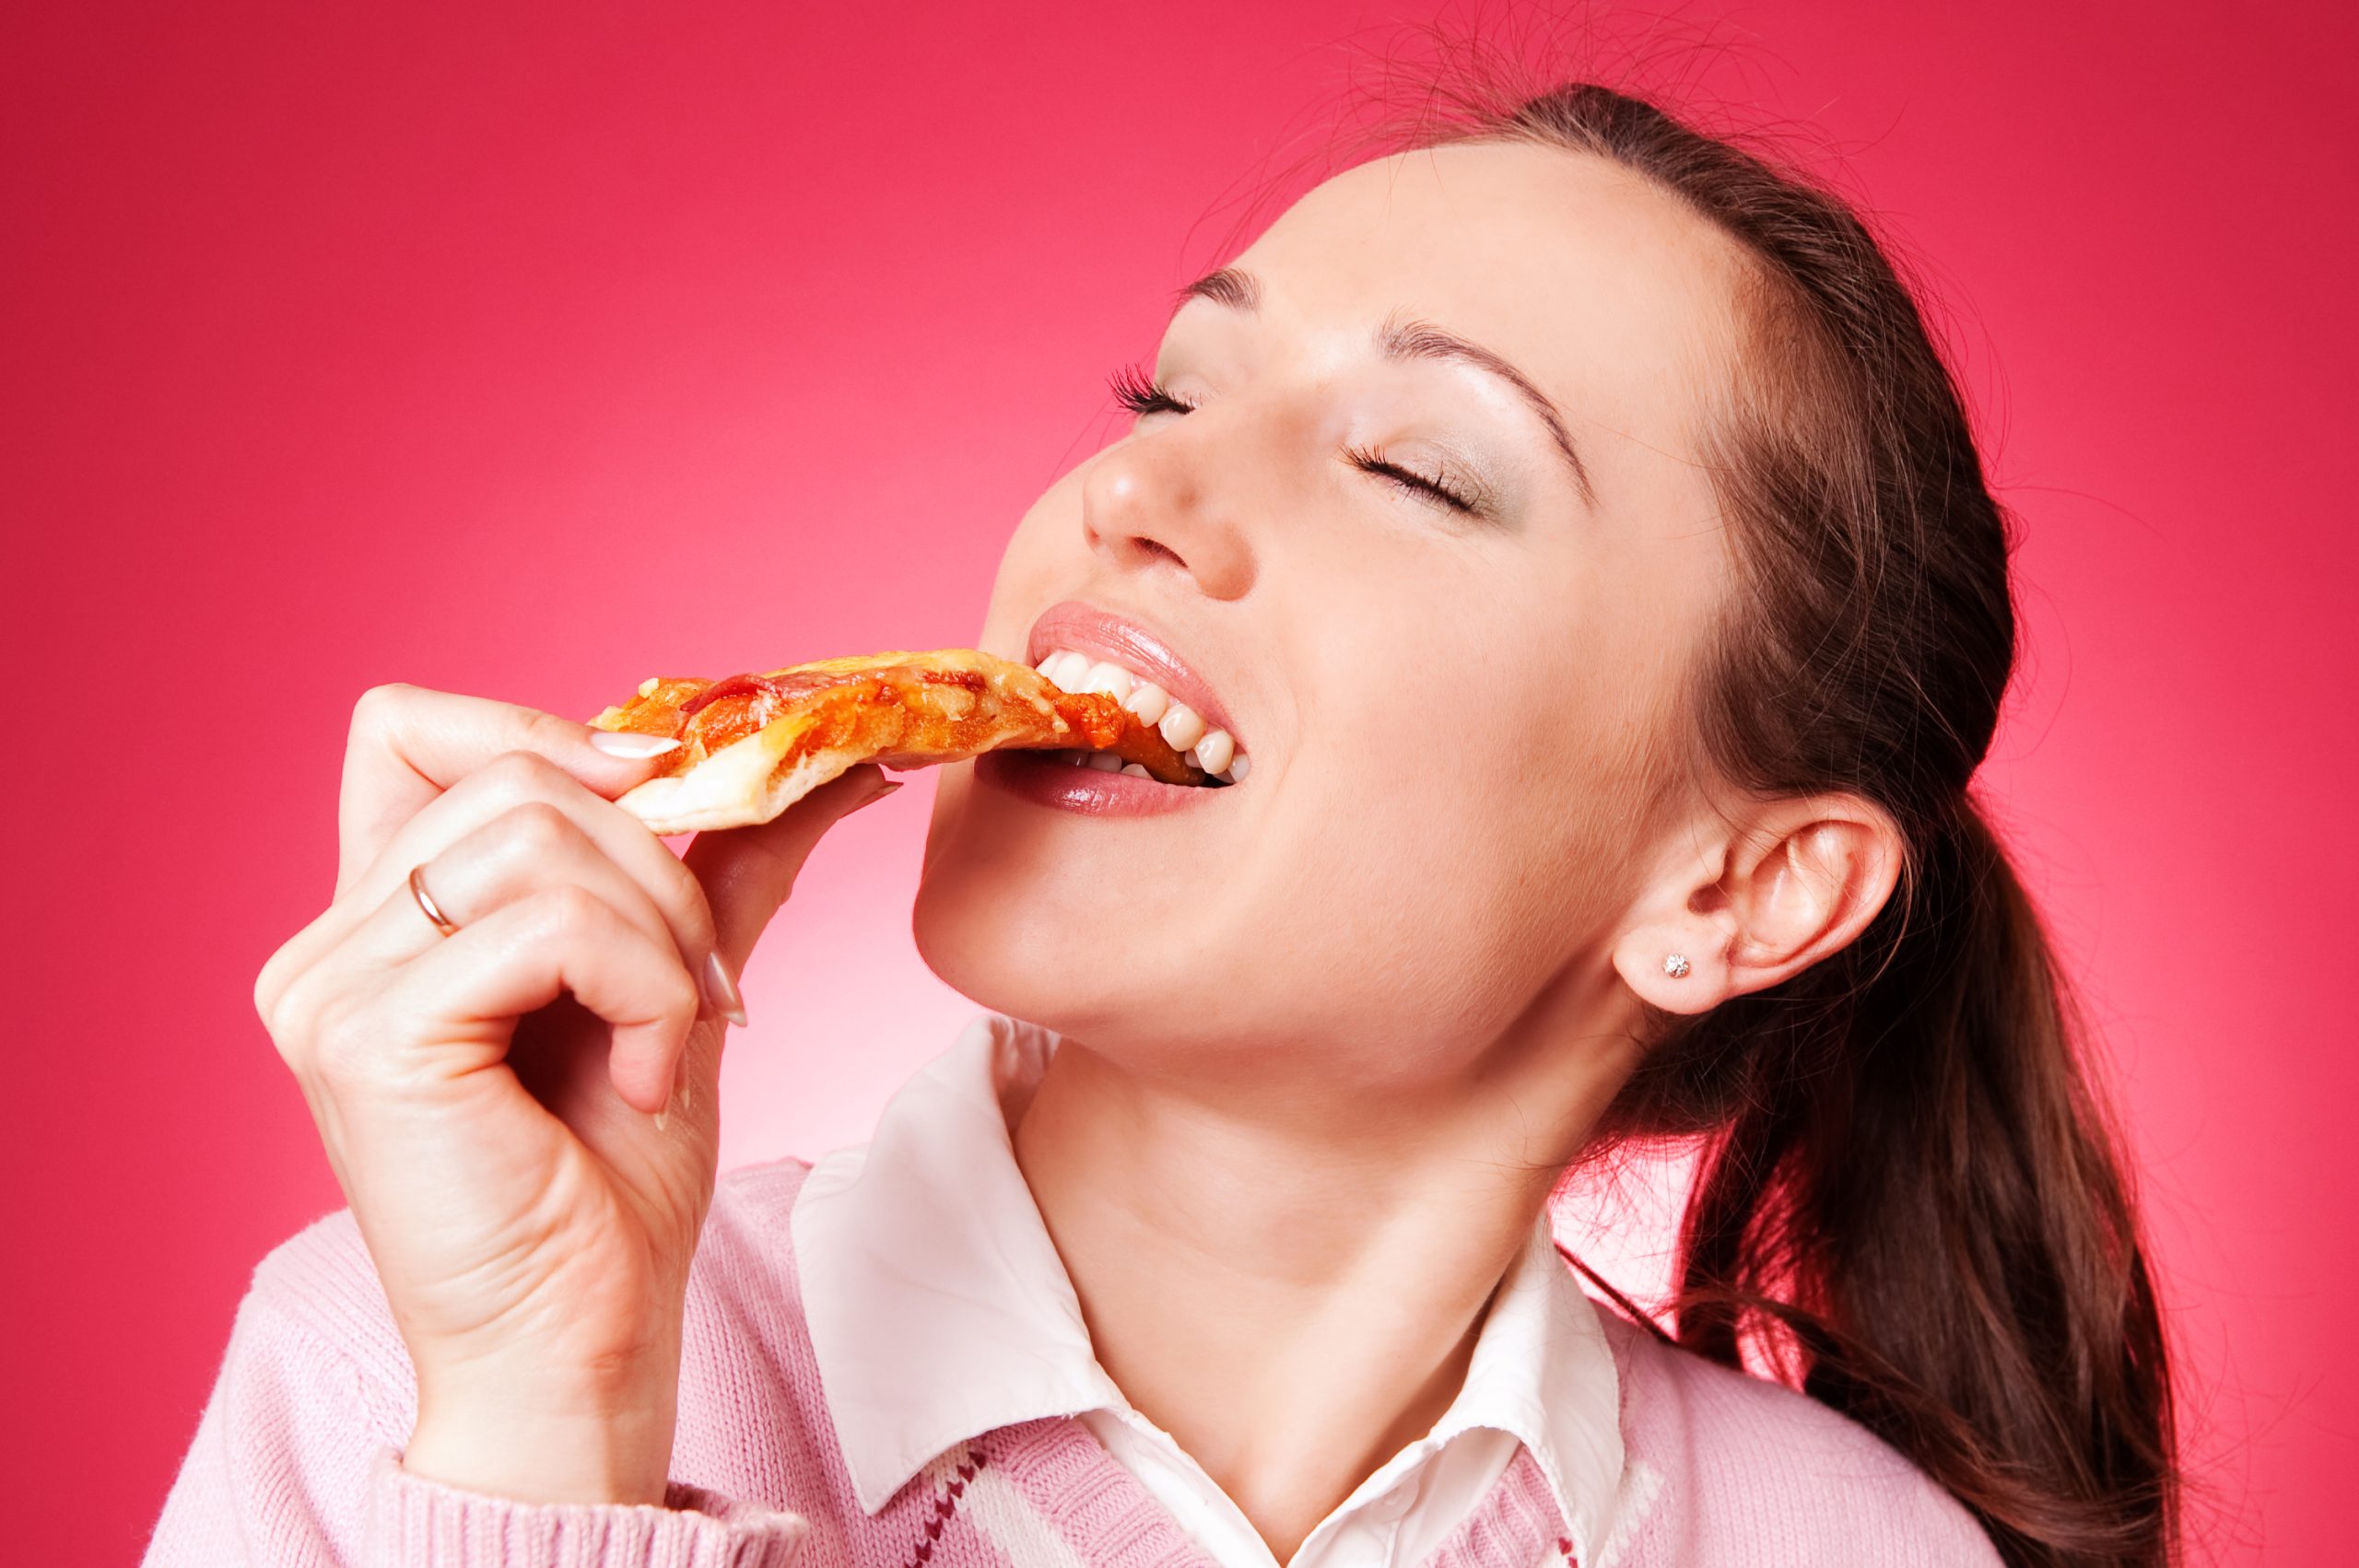 pretty woman love eating pizza